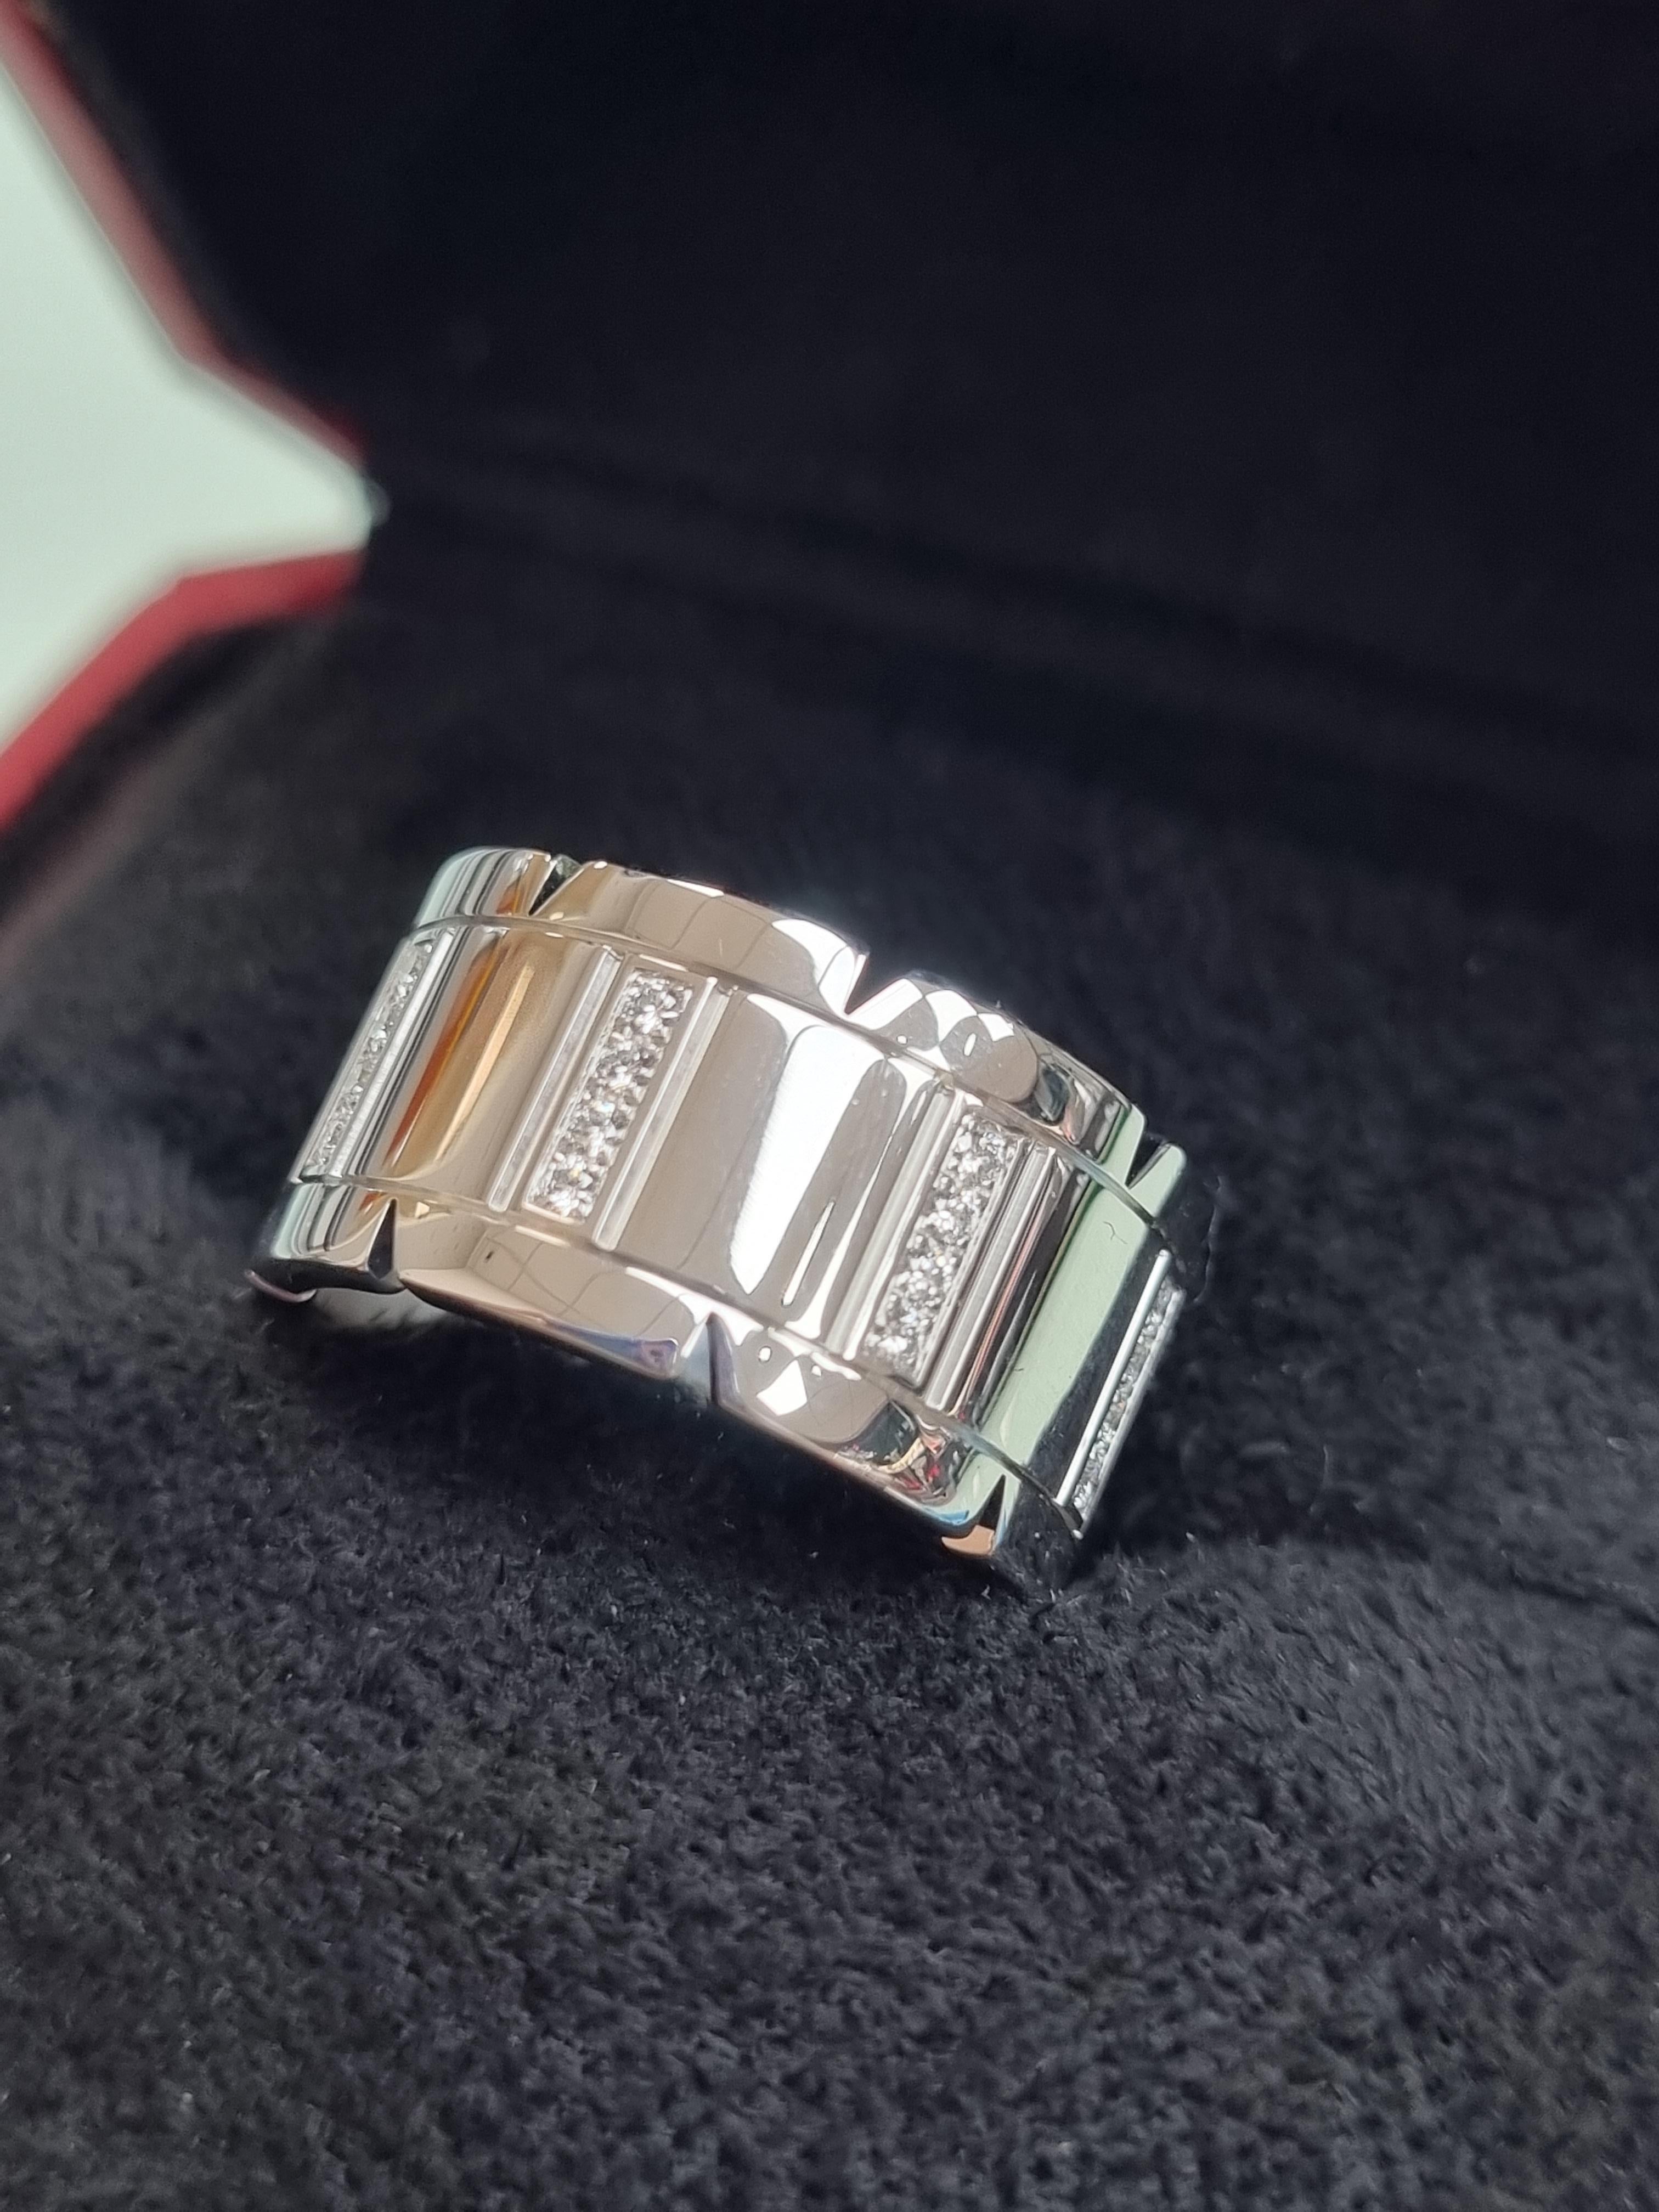 Cartier Tank Francaise 18k White Gold Diamond Ring In Excellent Condition For Sale In South Woodford, GB